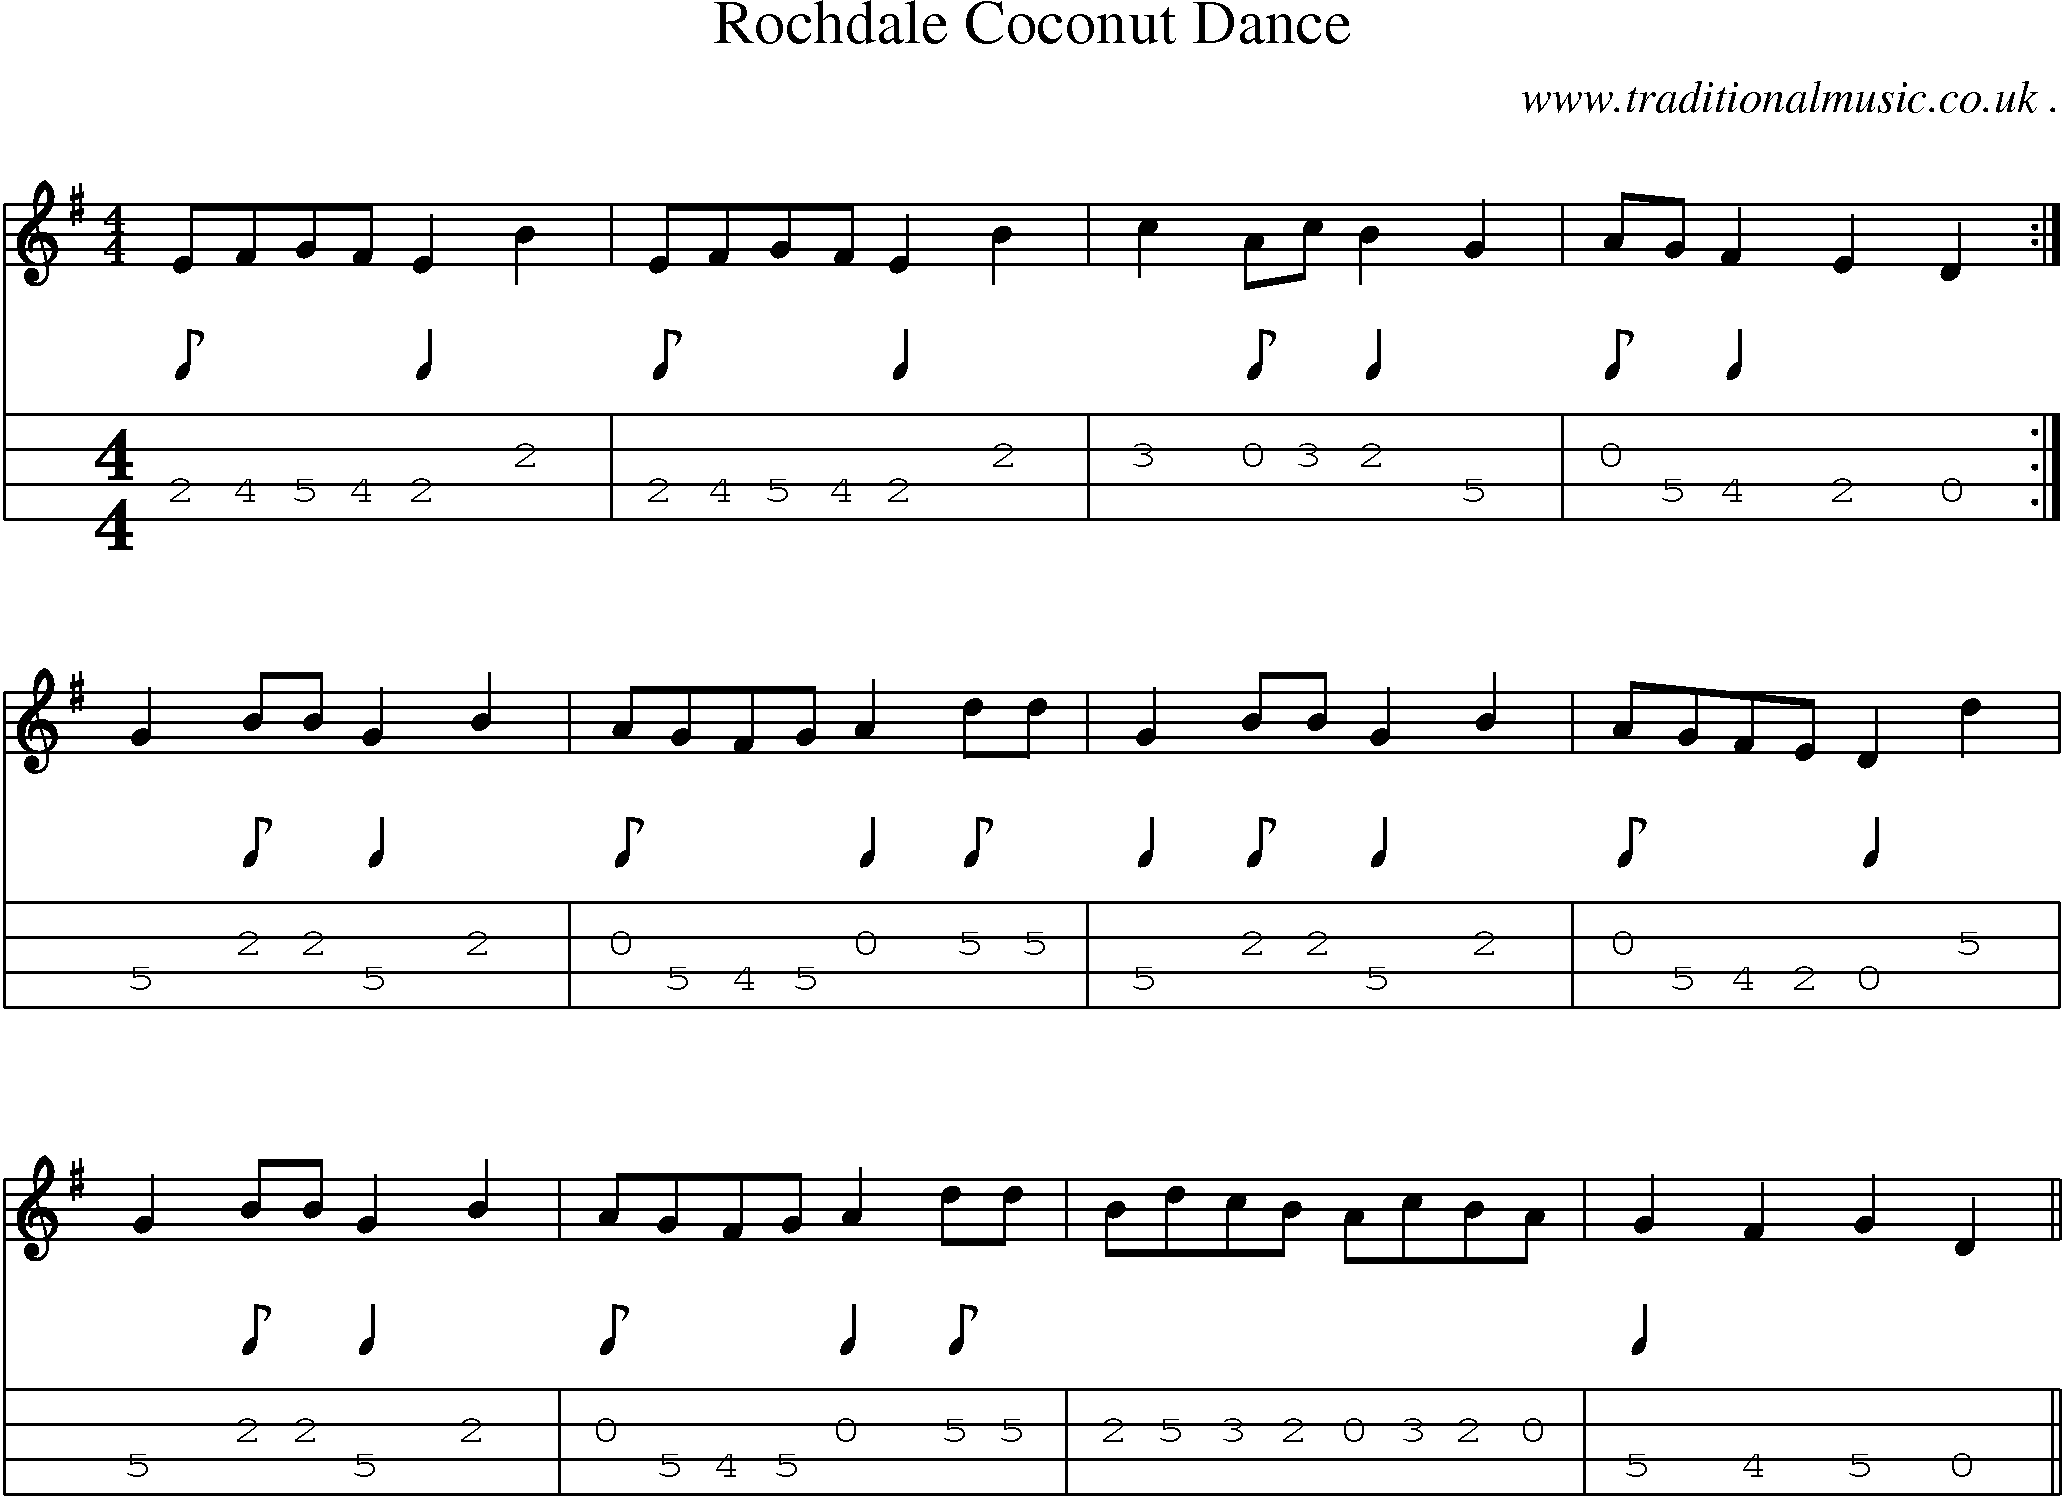 Sheet-Music and Mandolin Tabs for Rochdale Coconut Dance